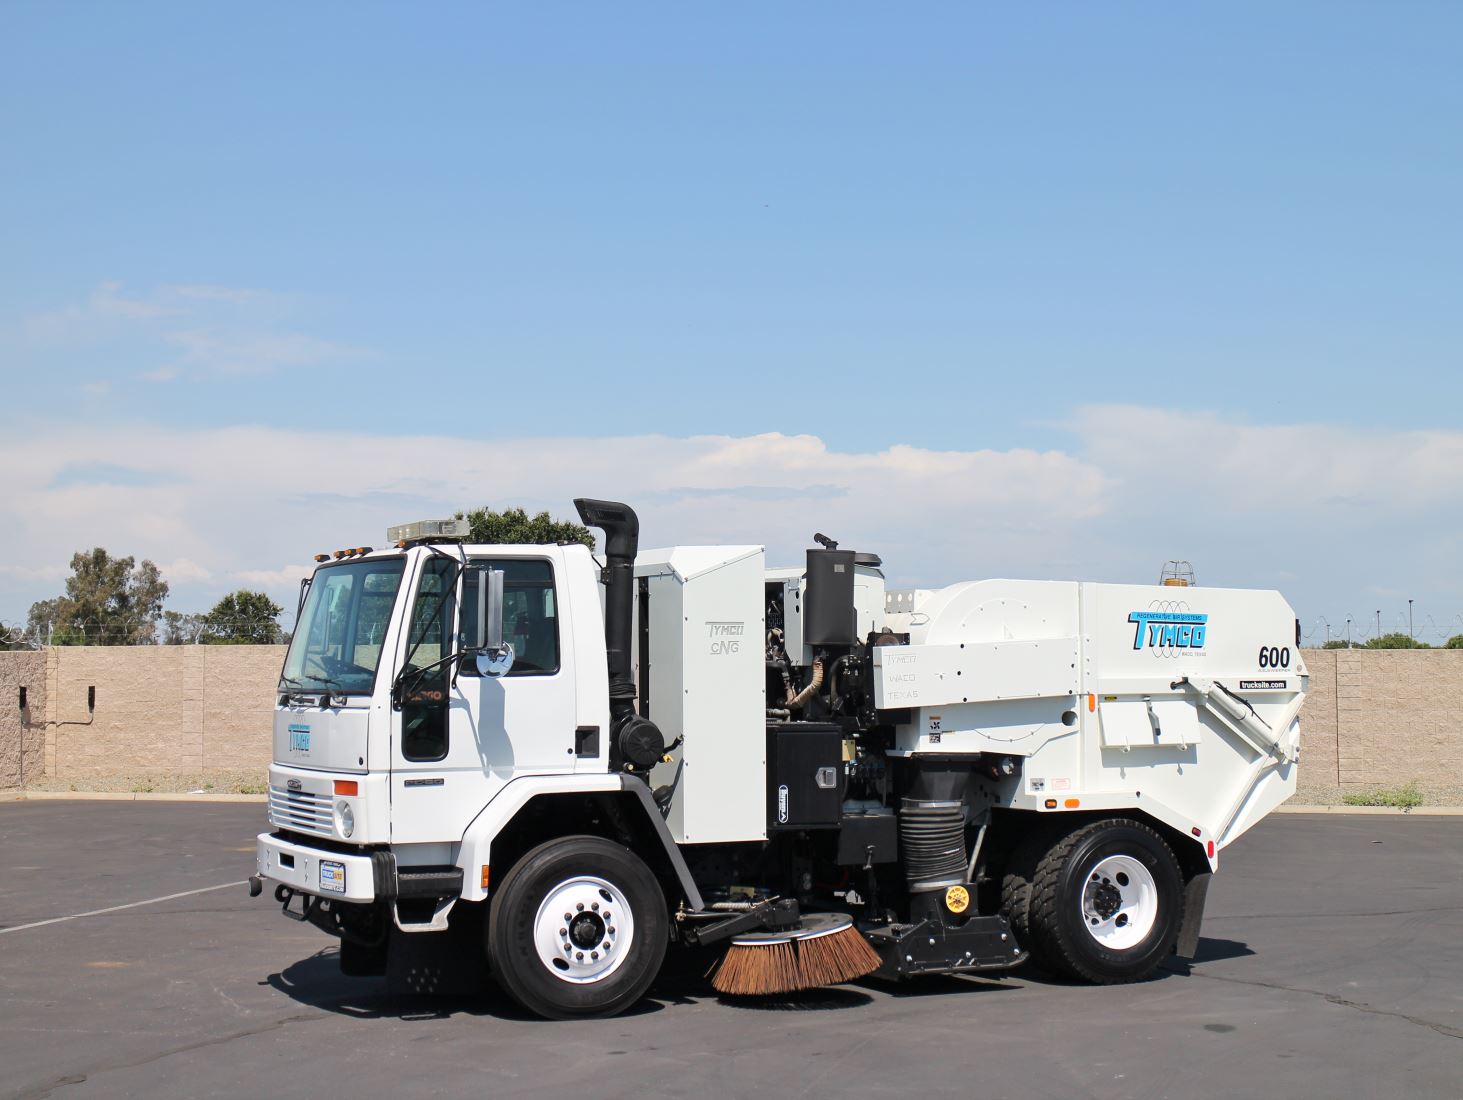 2002 Freightliner Tymco 600 CNG Air Street Sweeper | TruckSite.com